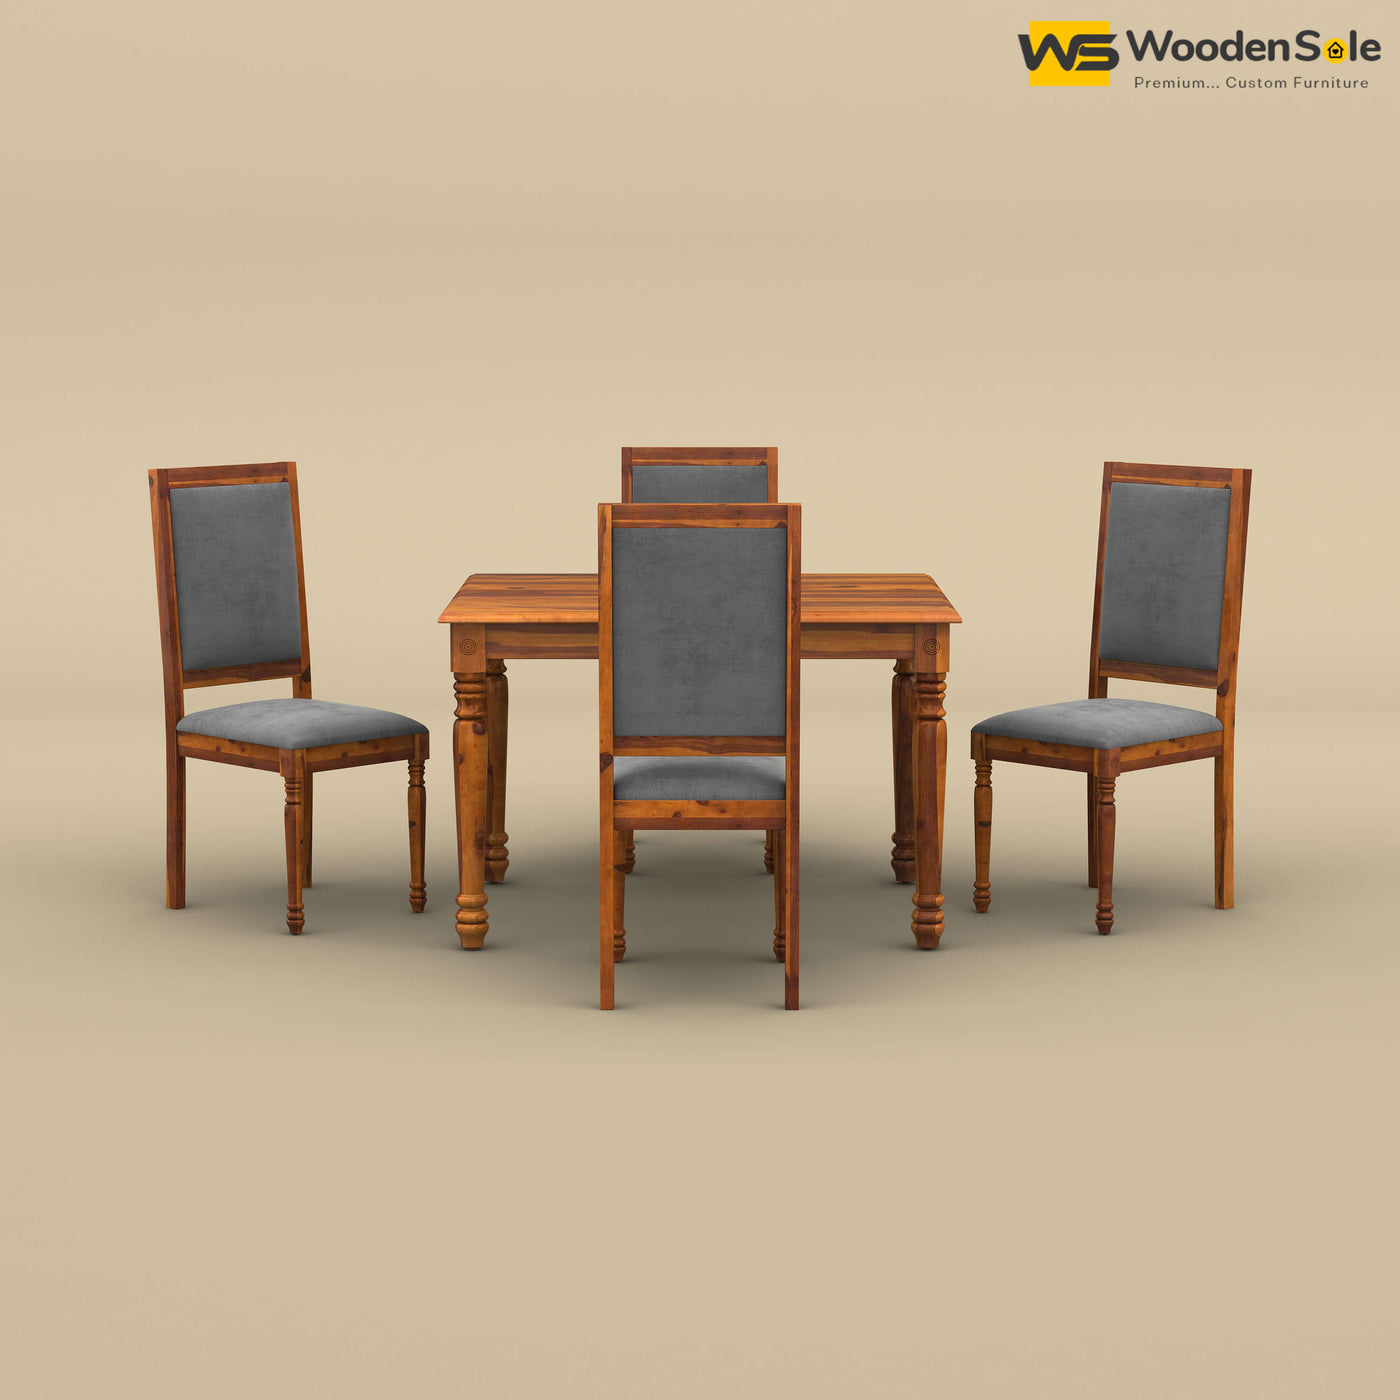 Engrave Dining Table Set 4 Seater (Honey Finish)